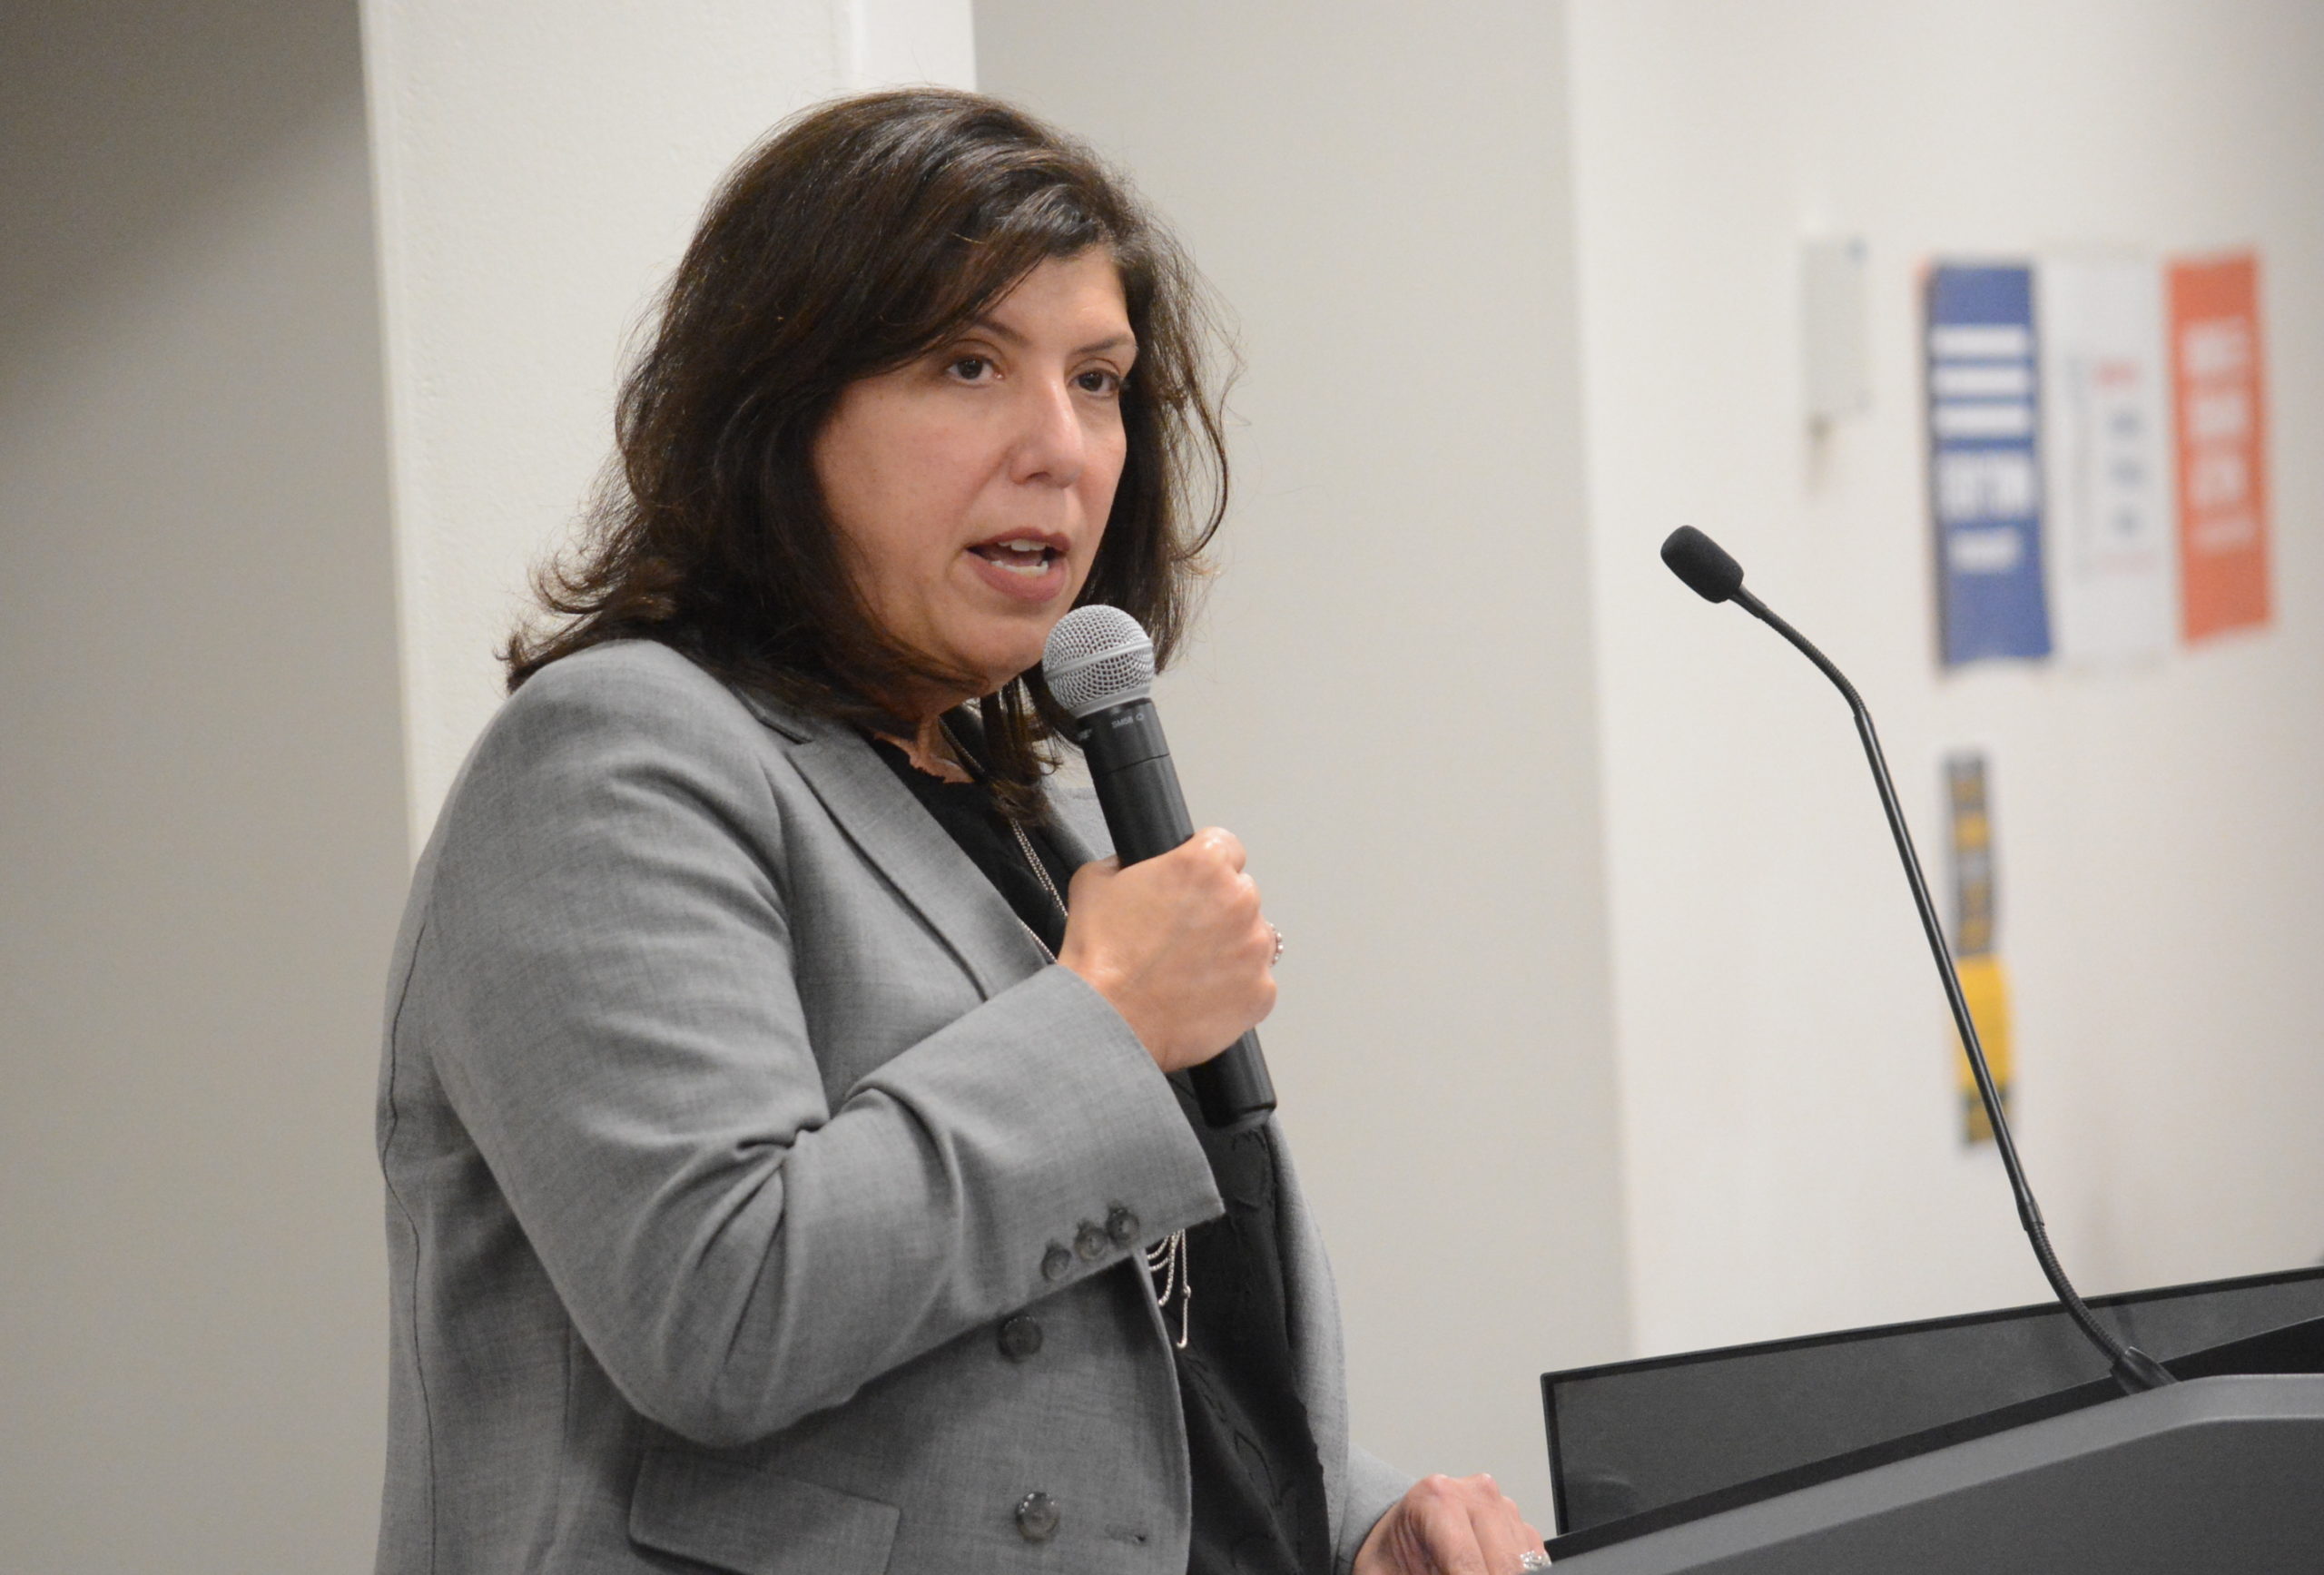 Nassau County DA Madeline Singas speaks to audience members at the gun violence prevention forum. (Photo by Janelle Clausen)